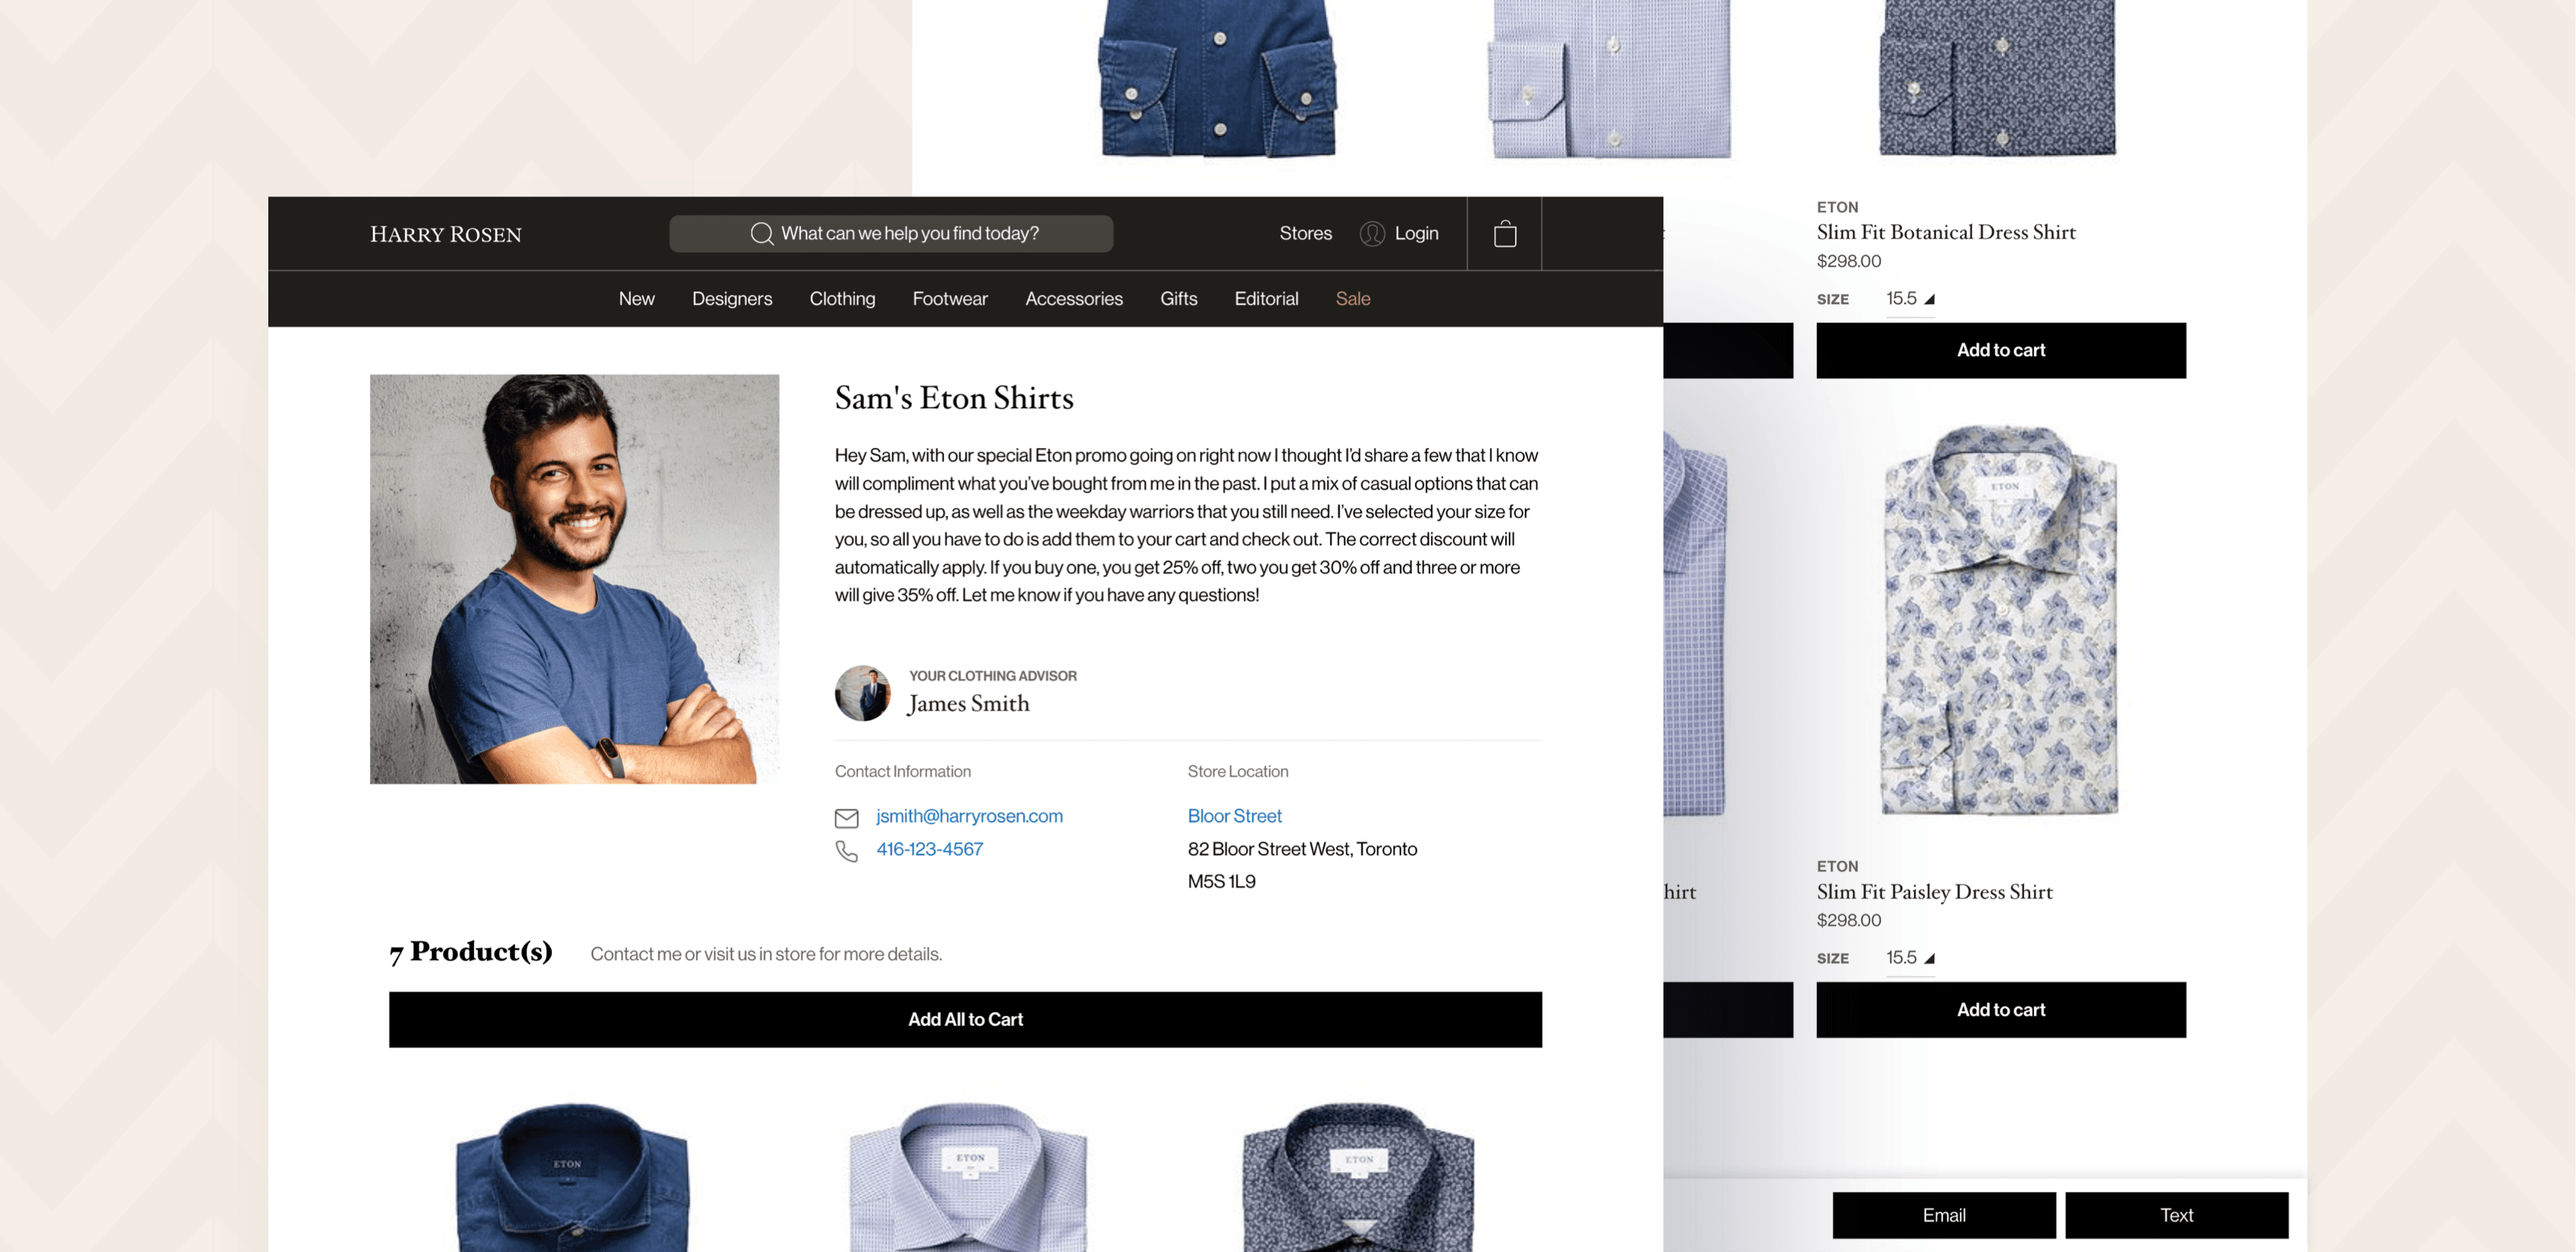 Screenshots of the Harry Rosen online shopping experience with personalized shopping suggestions.